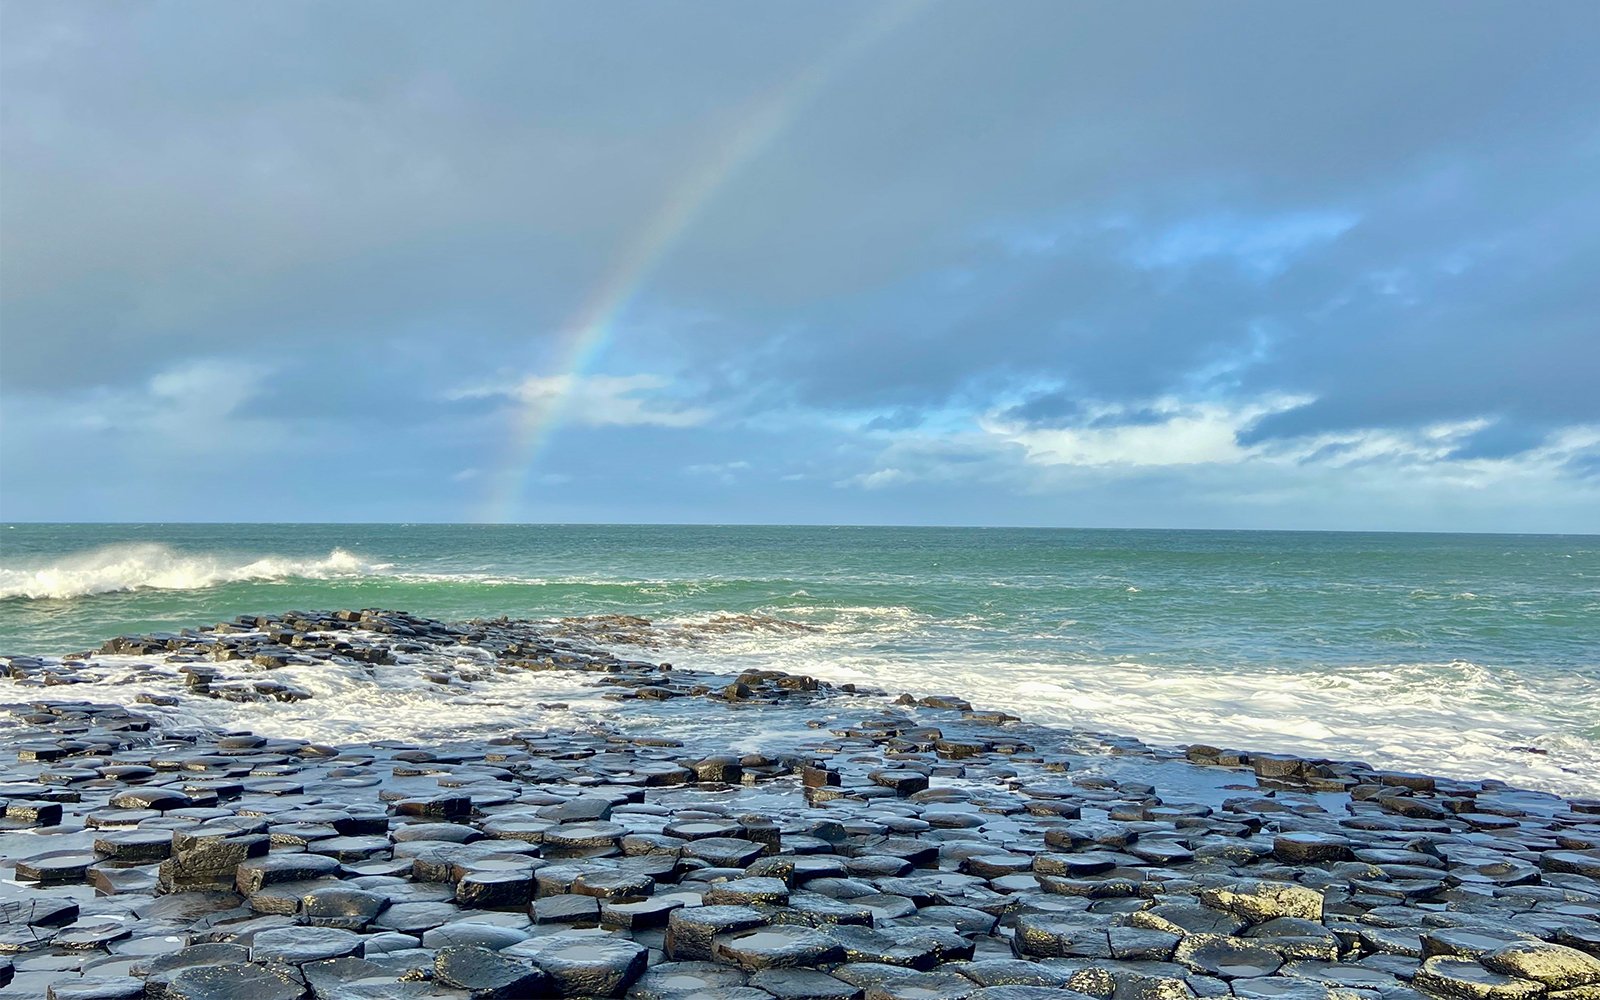 Rainbow over beach covered by circular stones